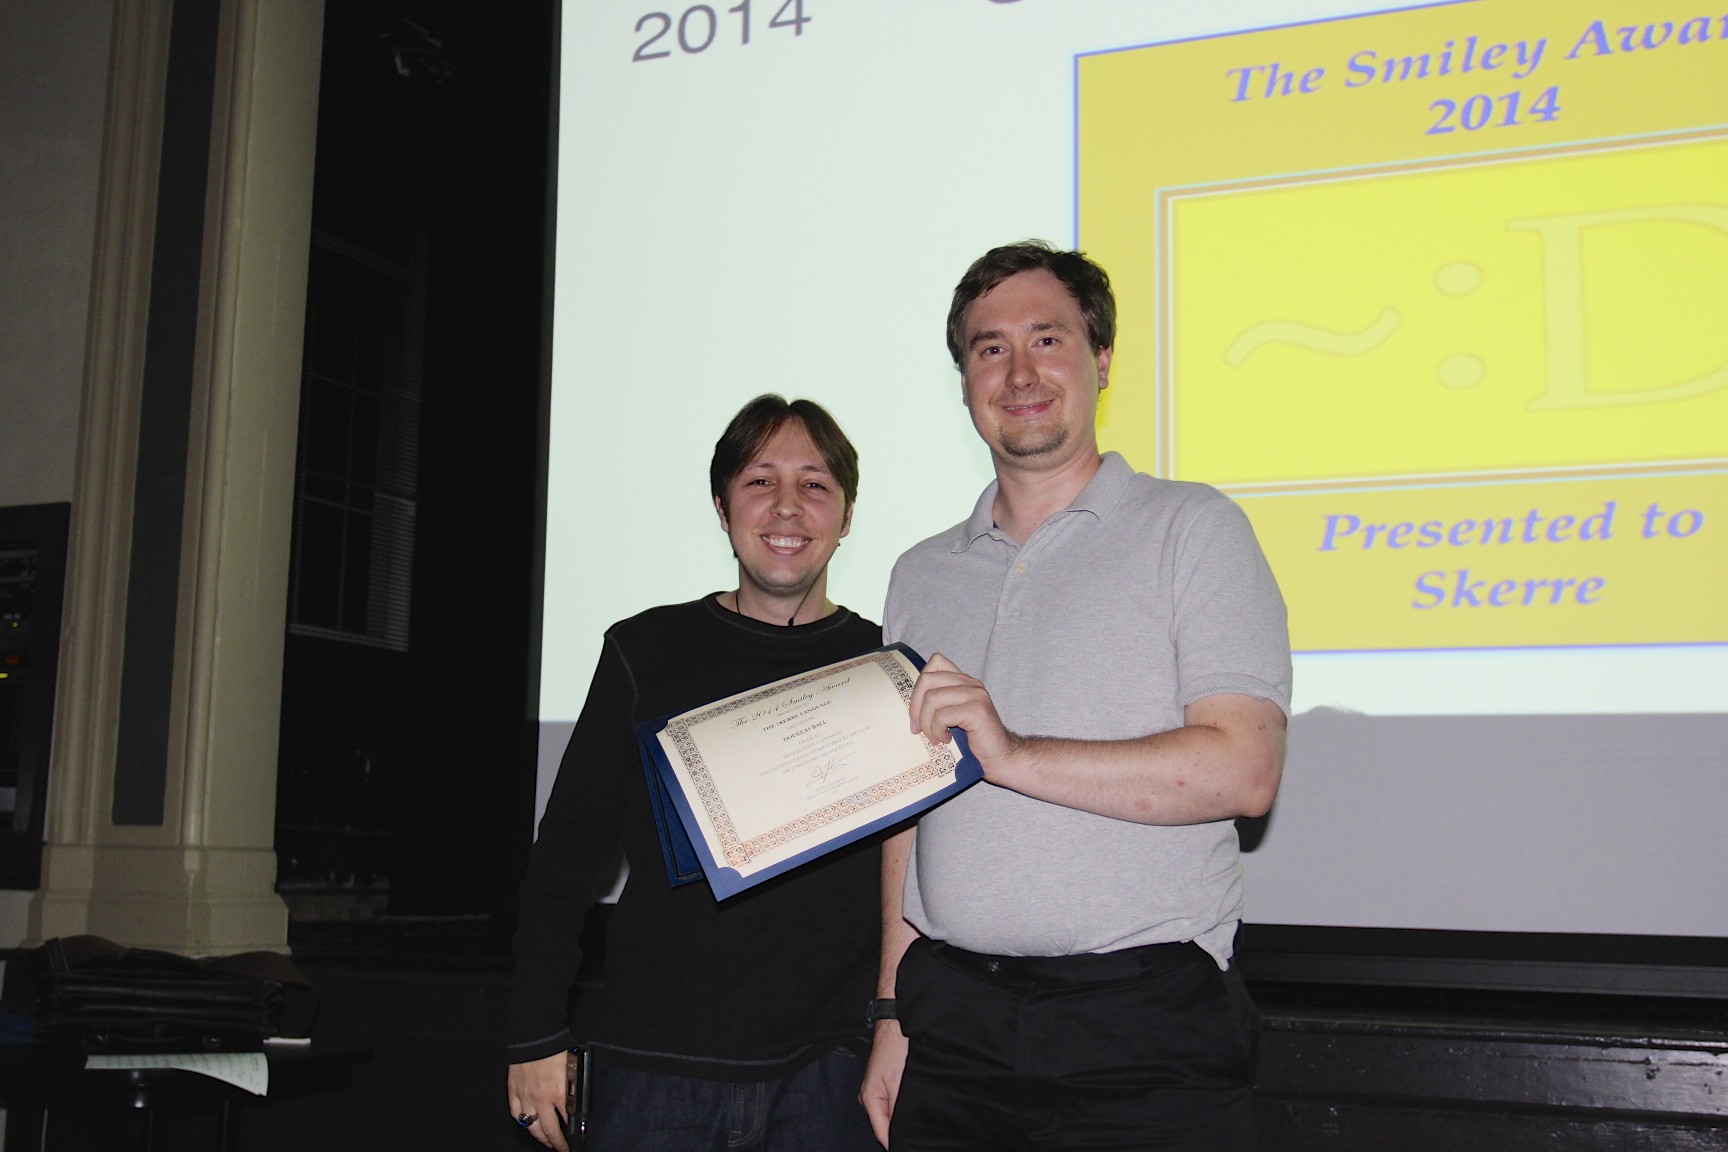 A picture of me and Doug as I presented him with the 2014 Smiley Award.